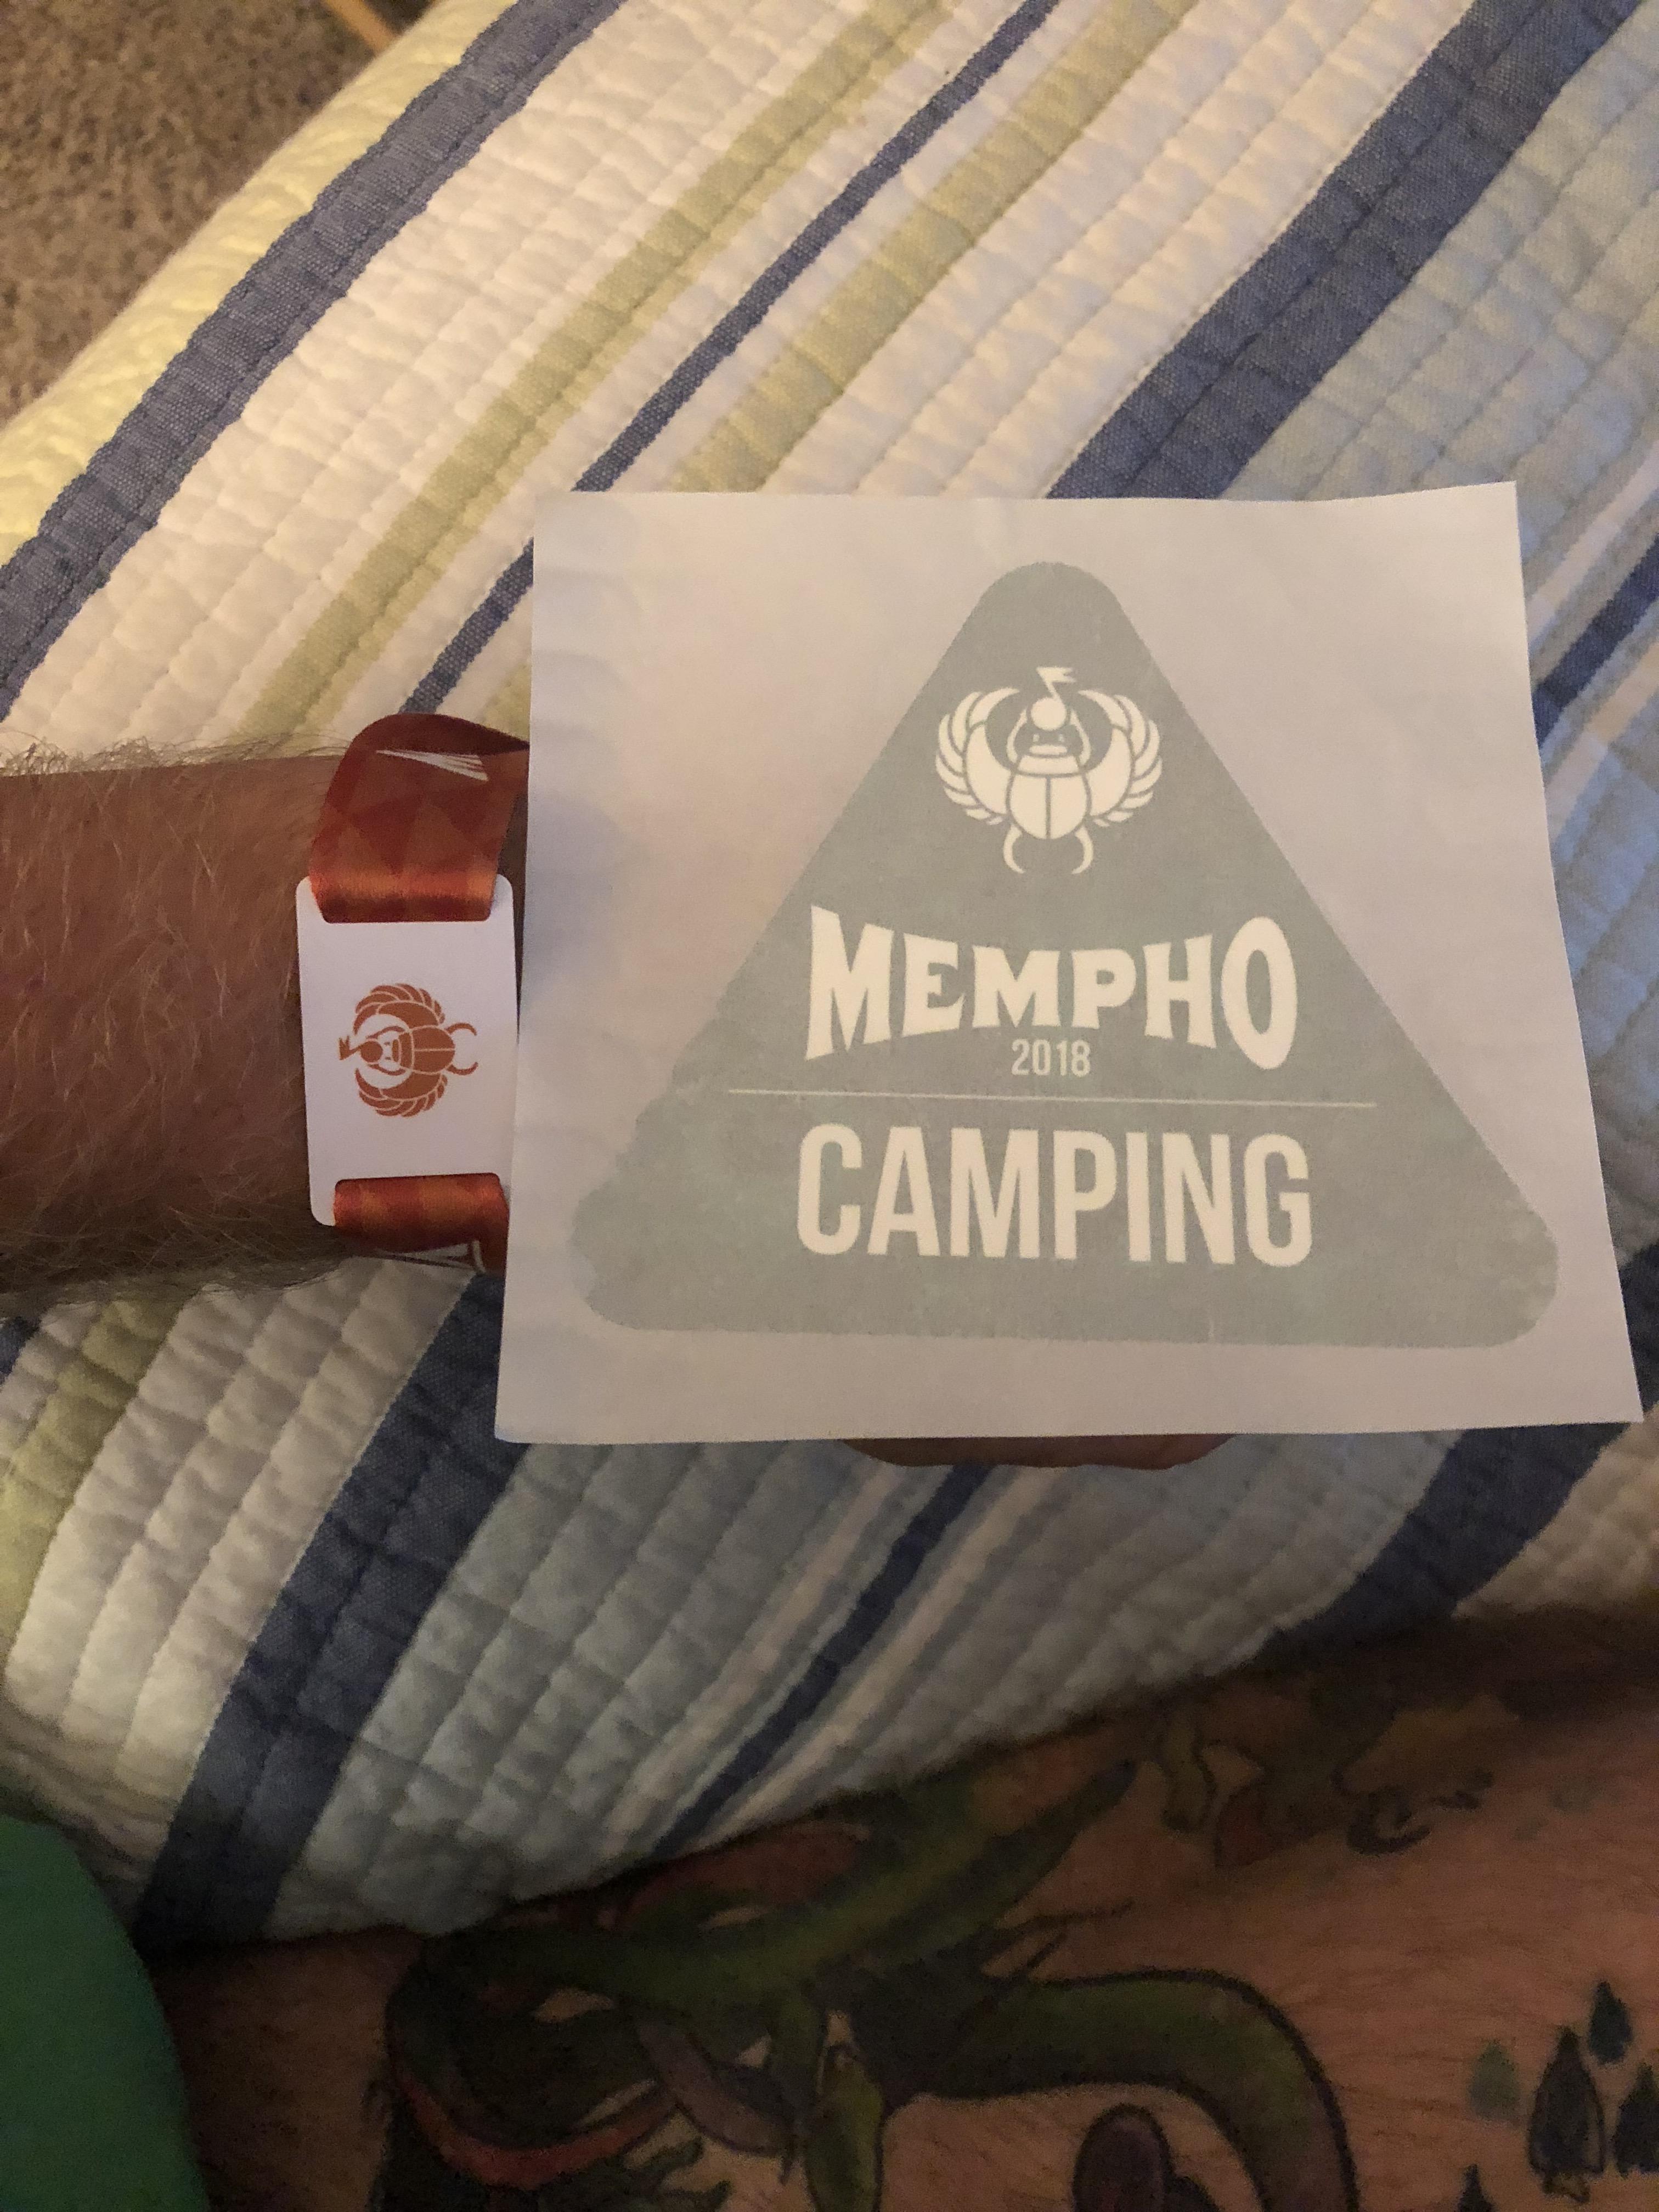 Roo Camping Logo - Camping solo at Mempho fest in Memphis this weekend. Any chance I'll ...